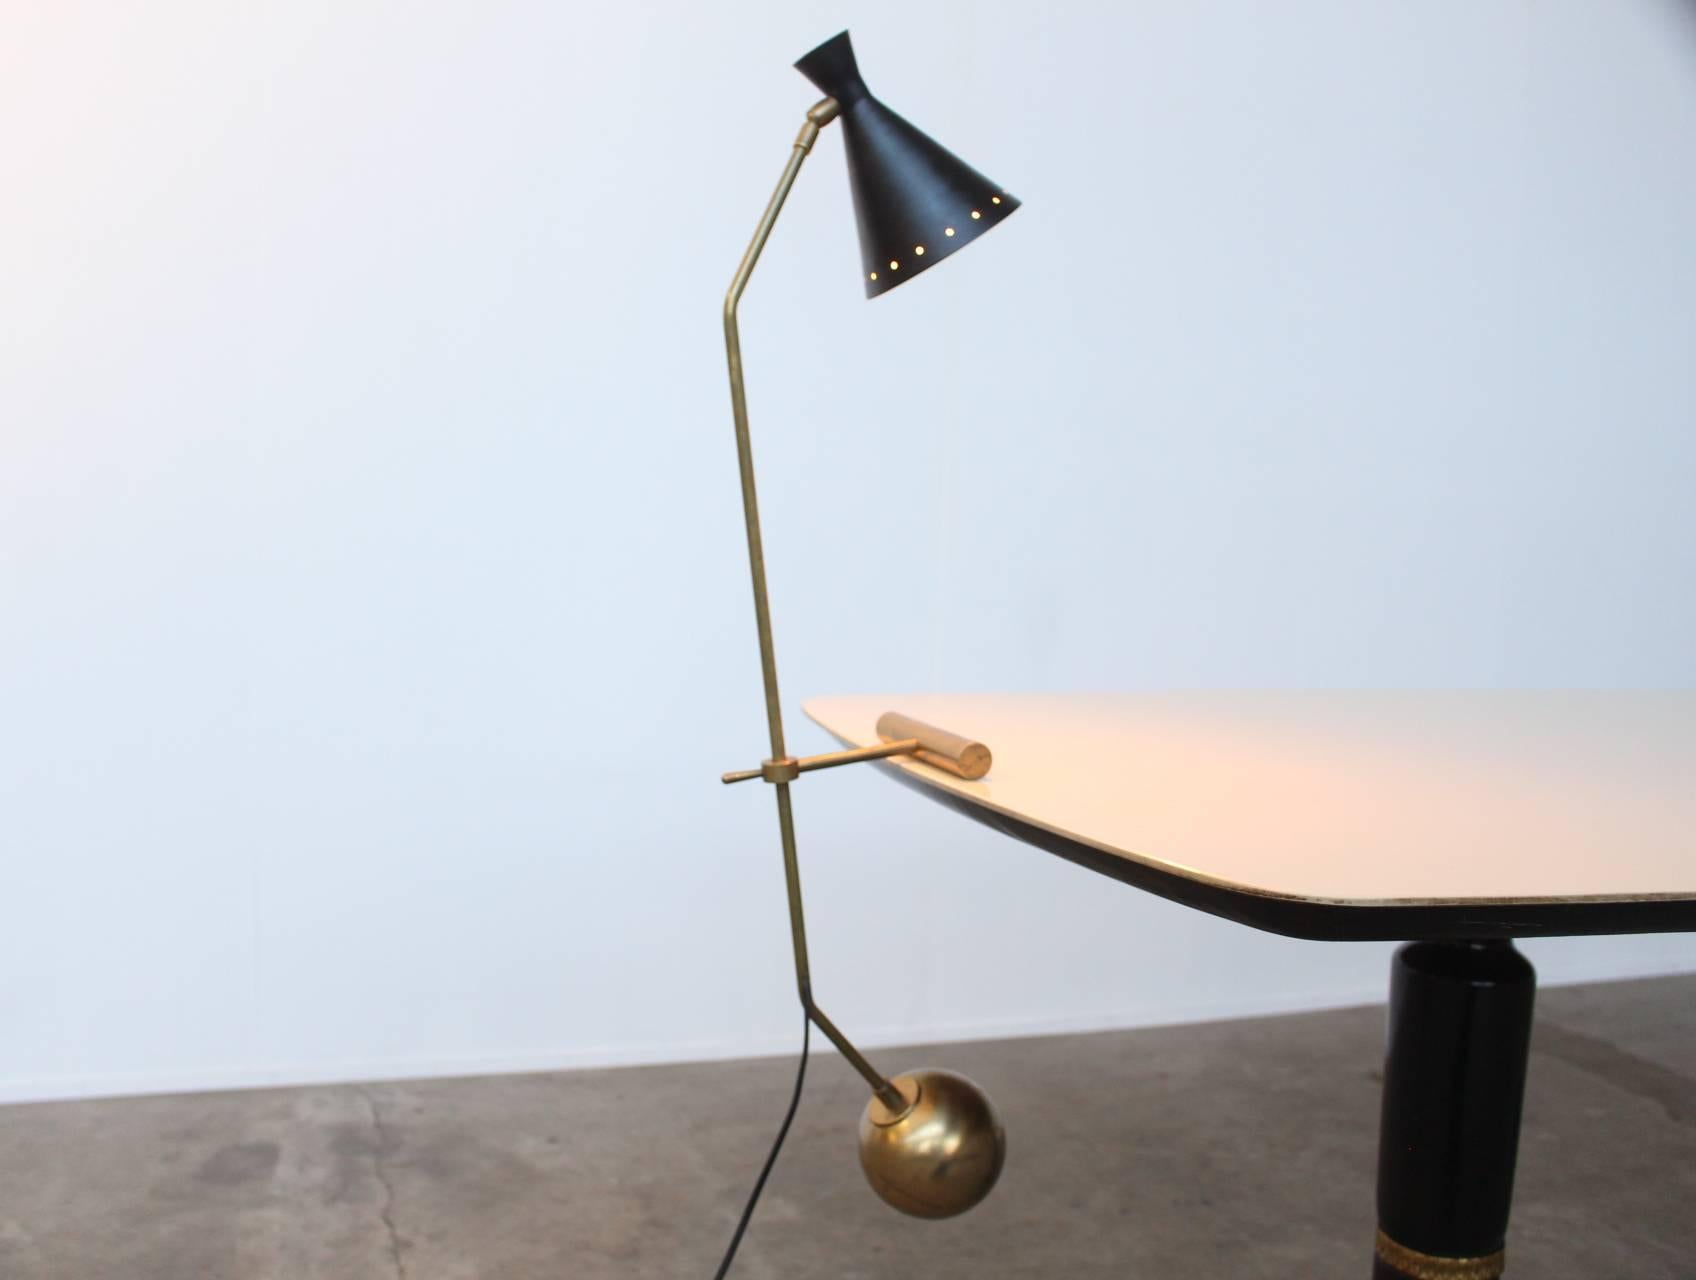 Beautiful elegant counter weight desk or table lamp identical to Stilnovo. The lamp balances and swings freely on the table edge by means of the weight of the solid brass counter balance ball. The lamp is height adjustable and the shade is in